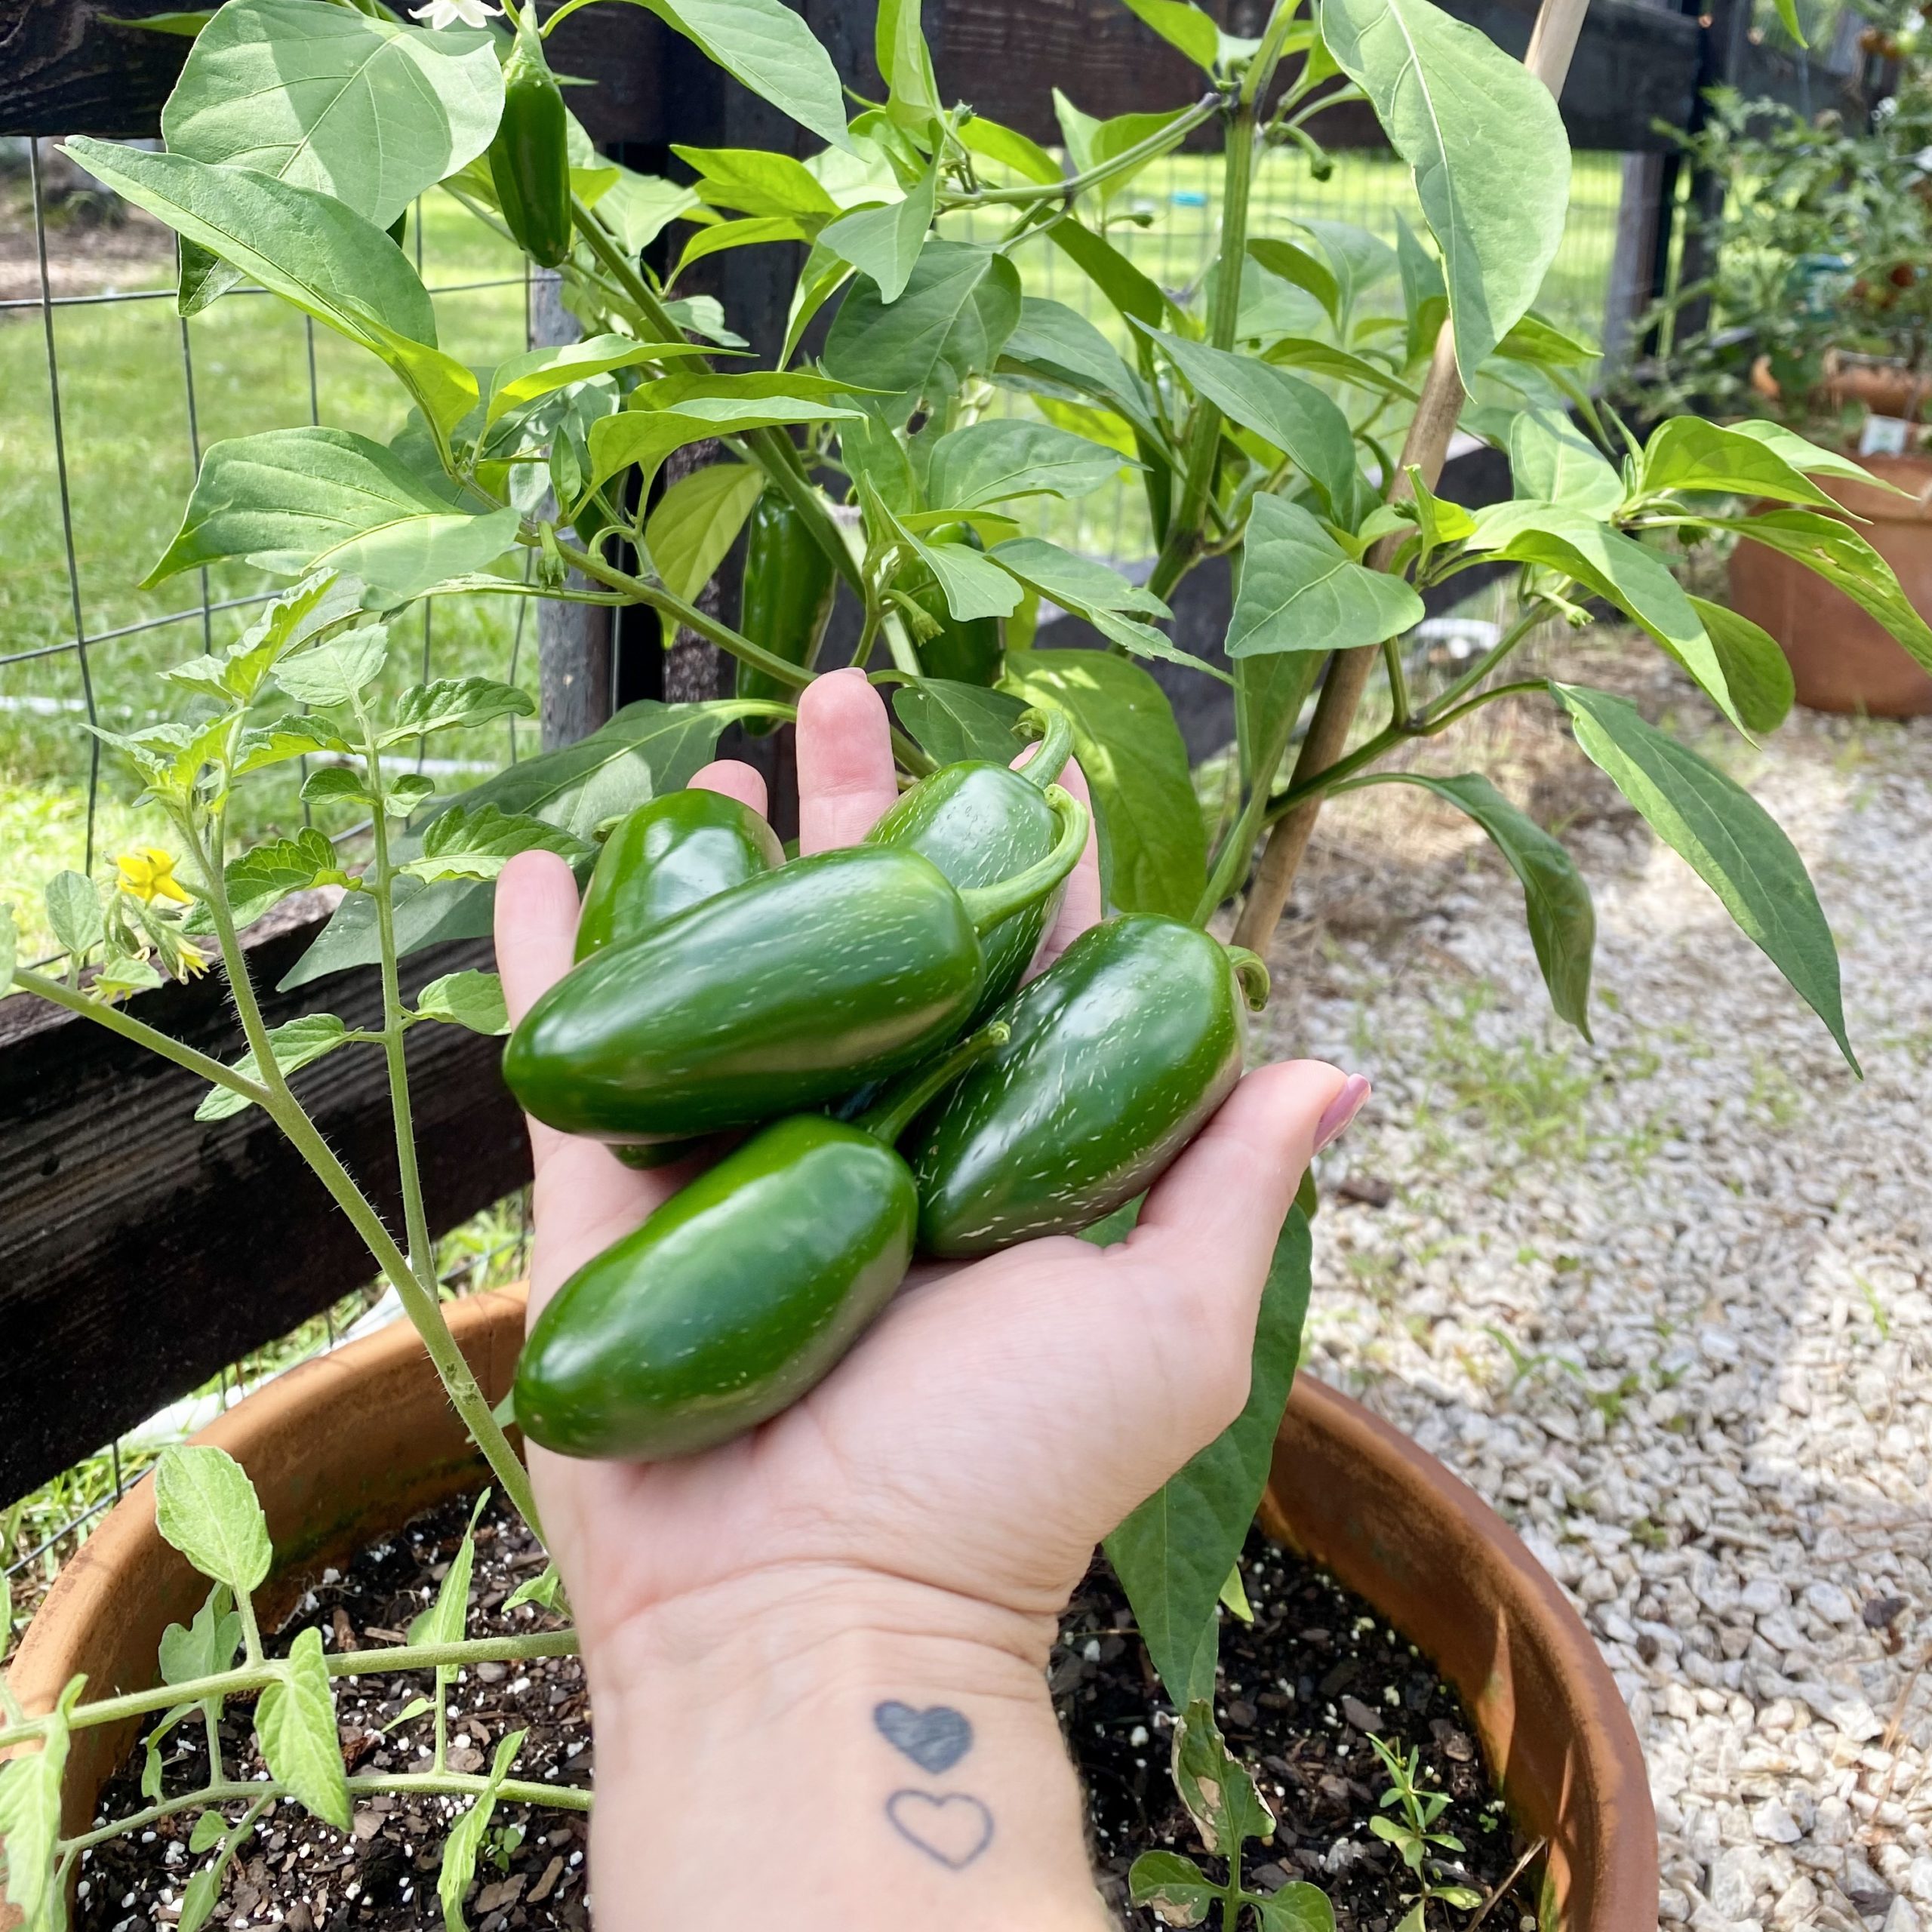 A handful of jalapeño peppers in front of a pepper plant in the garden.